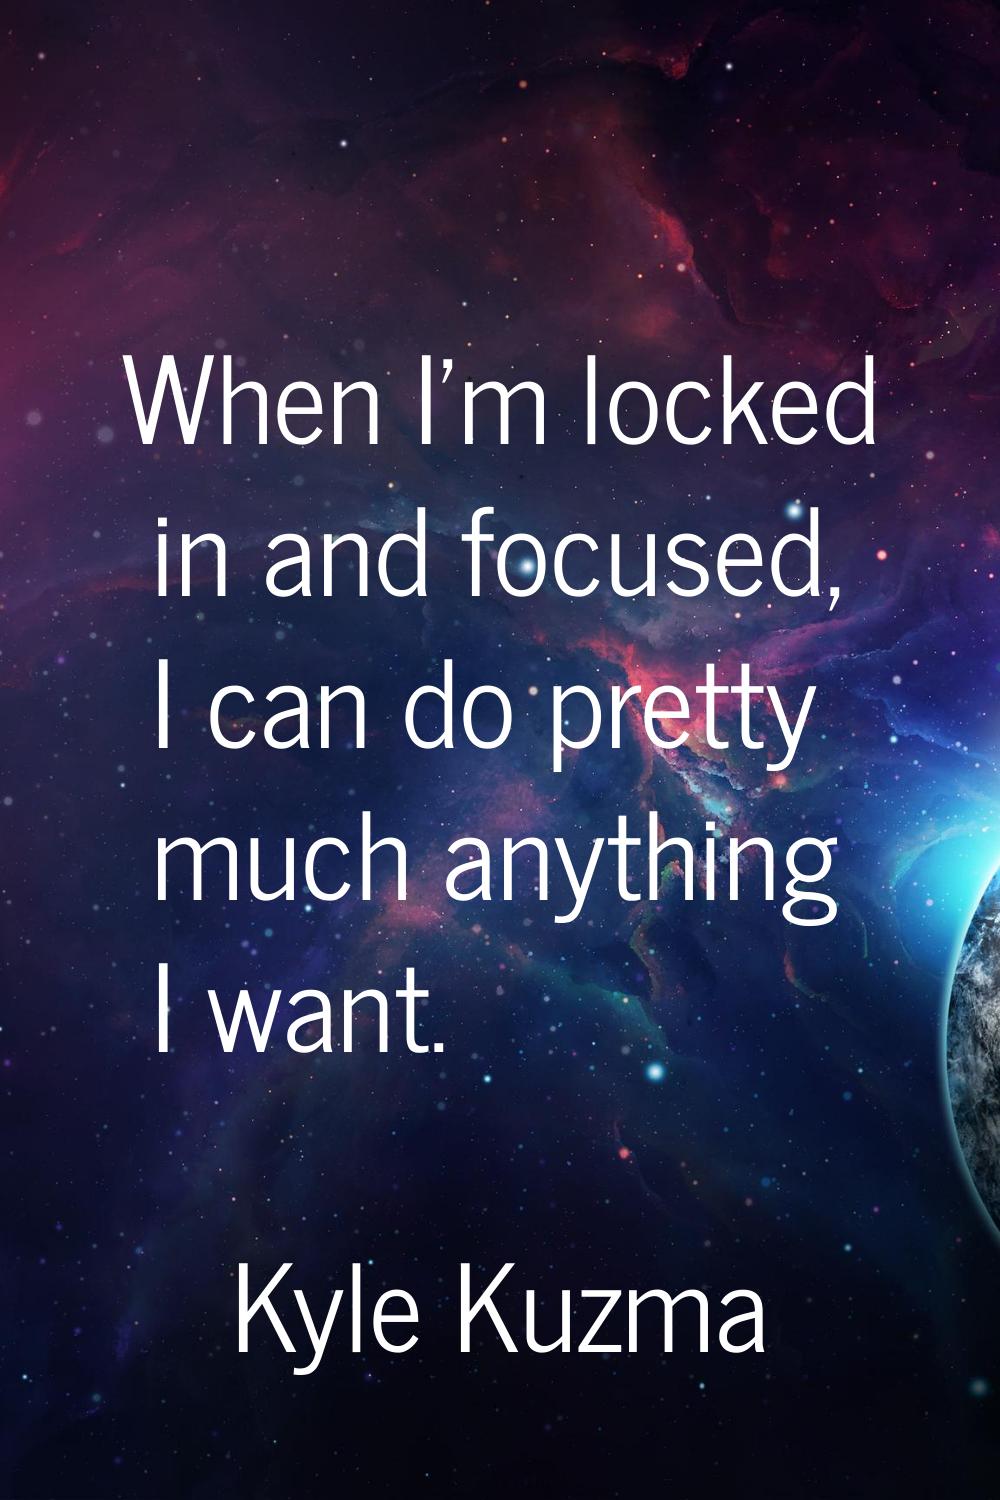 When I'm locked in and focused, I can do pretty much anything I want.